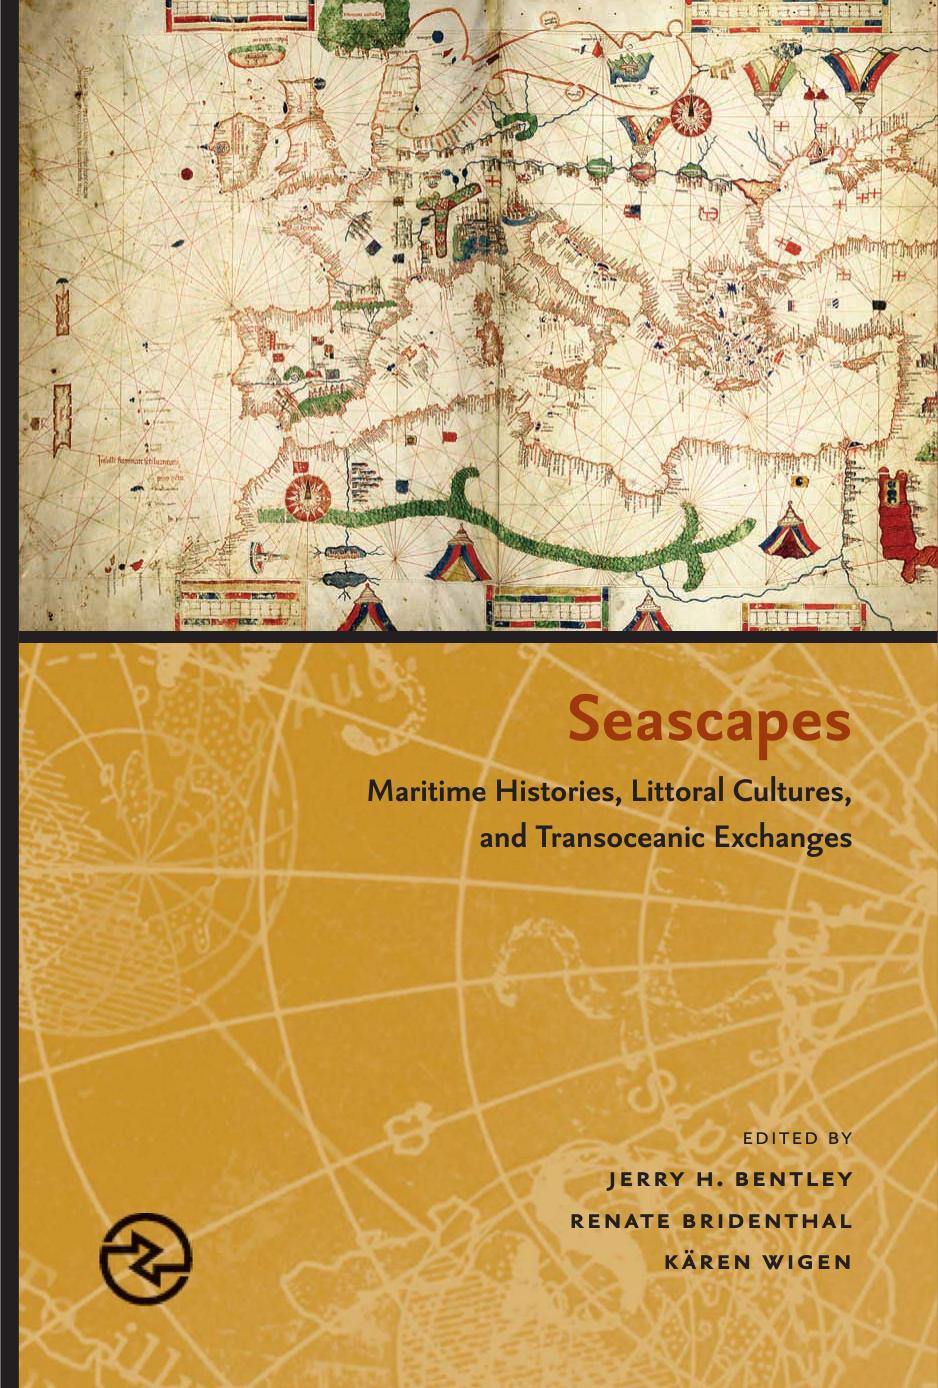 Seascapes: Maritime Histories, Littoral Cultures, and Transoceanic Exchanges